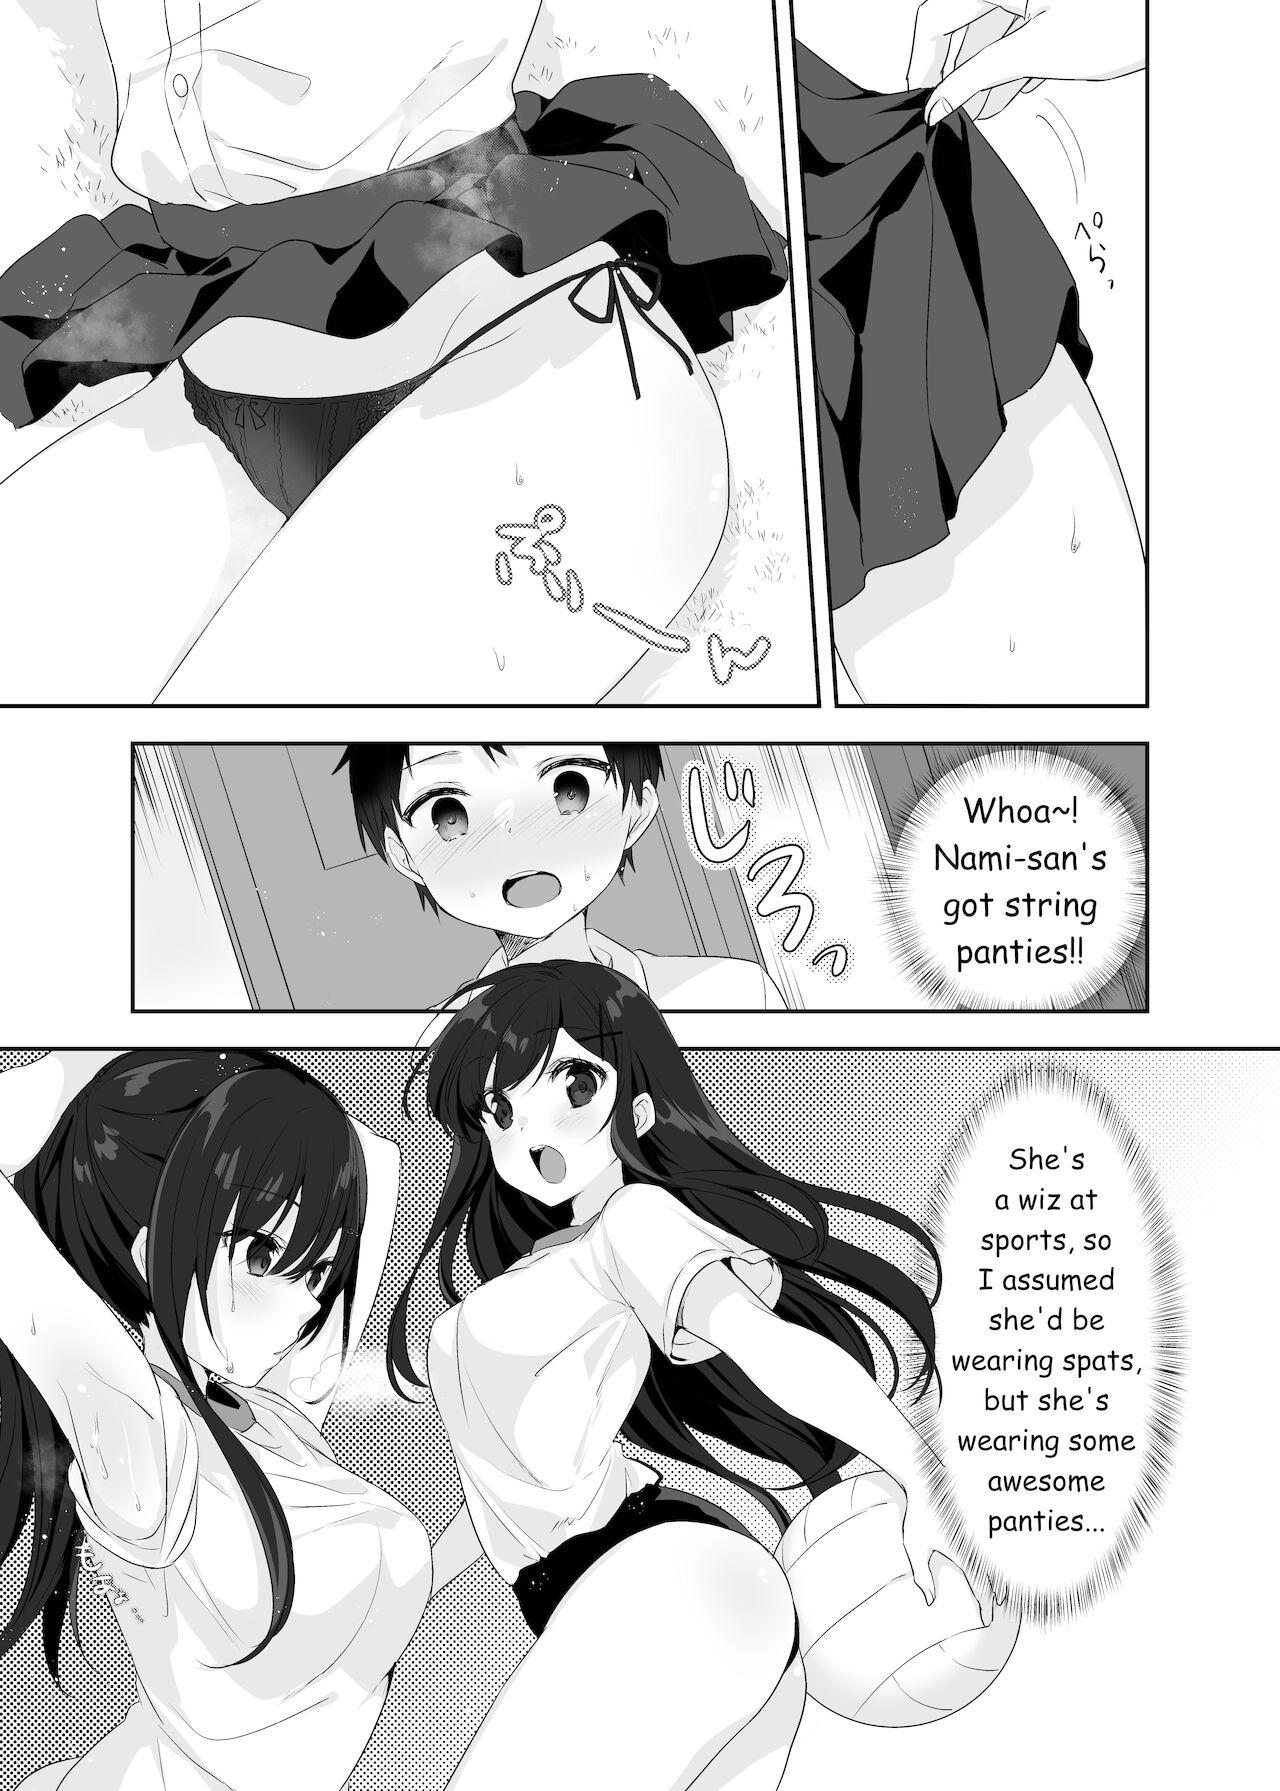 Unshaved Boku no Onee-chan to Tomodachi wo Nemurasete Osottemitara Kaeriuchi ni Atta | The Tables were Turned when I tried to Rape my Sister and her Friends while they were Asleep Gostoso - Page 5